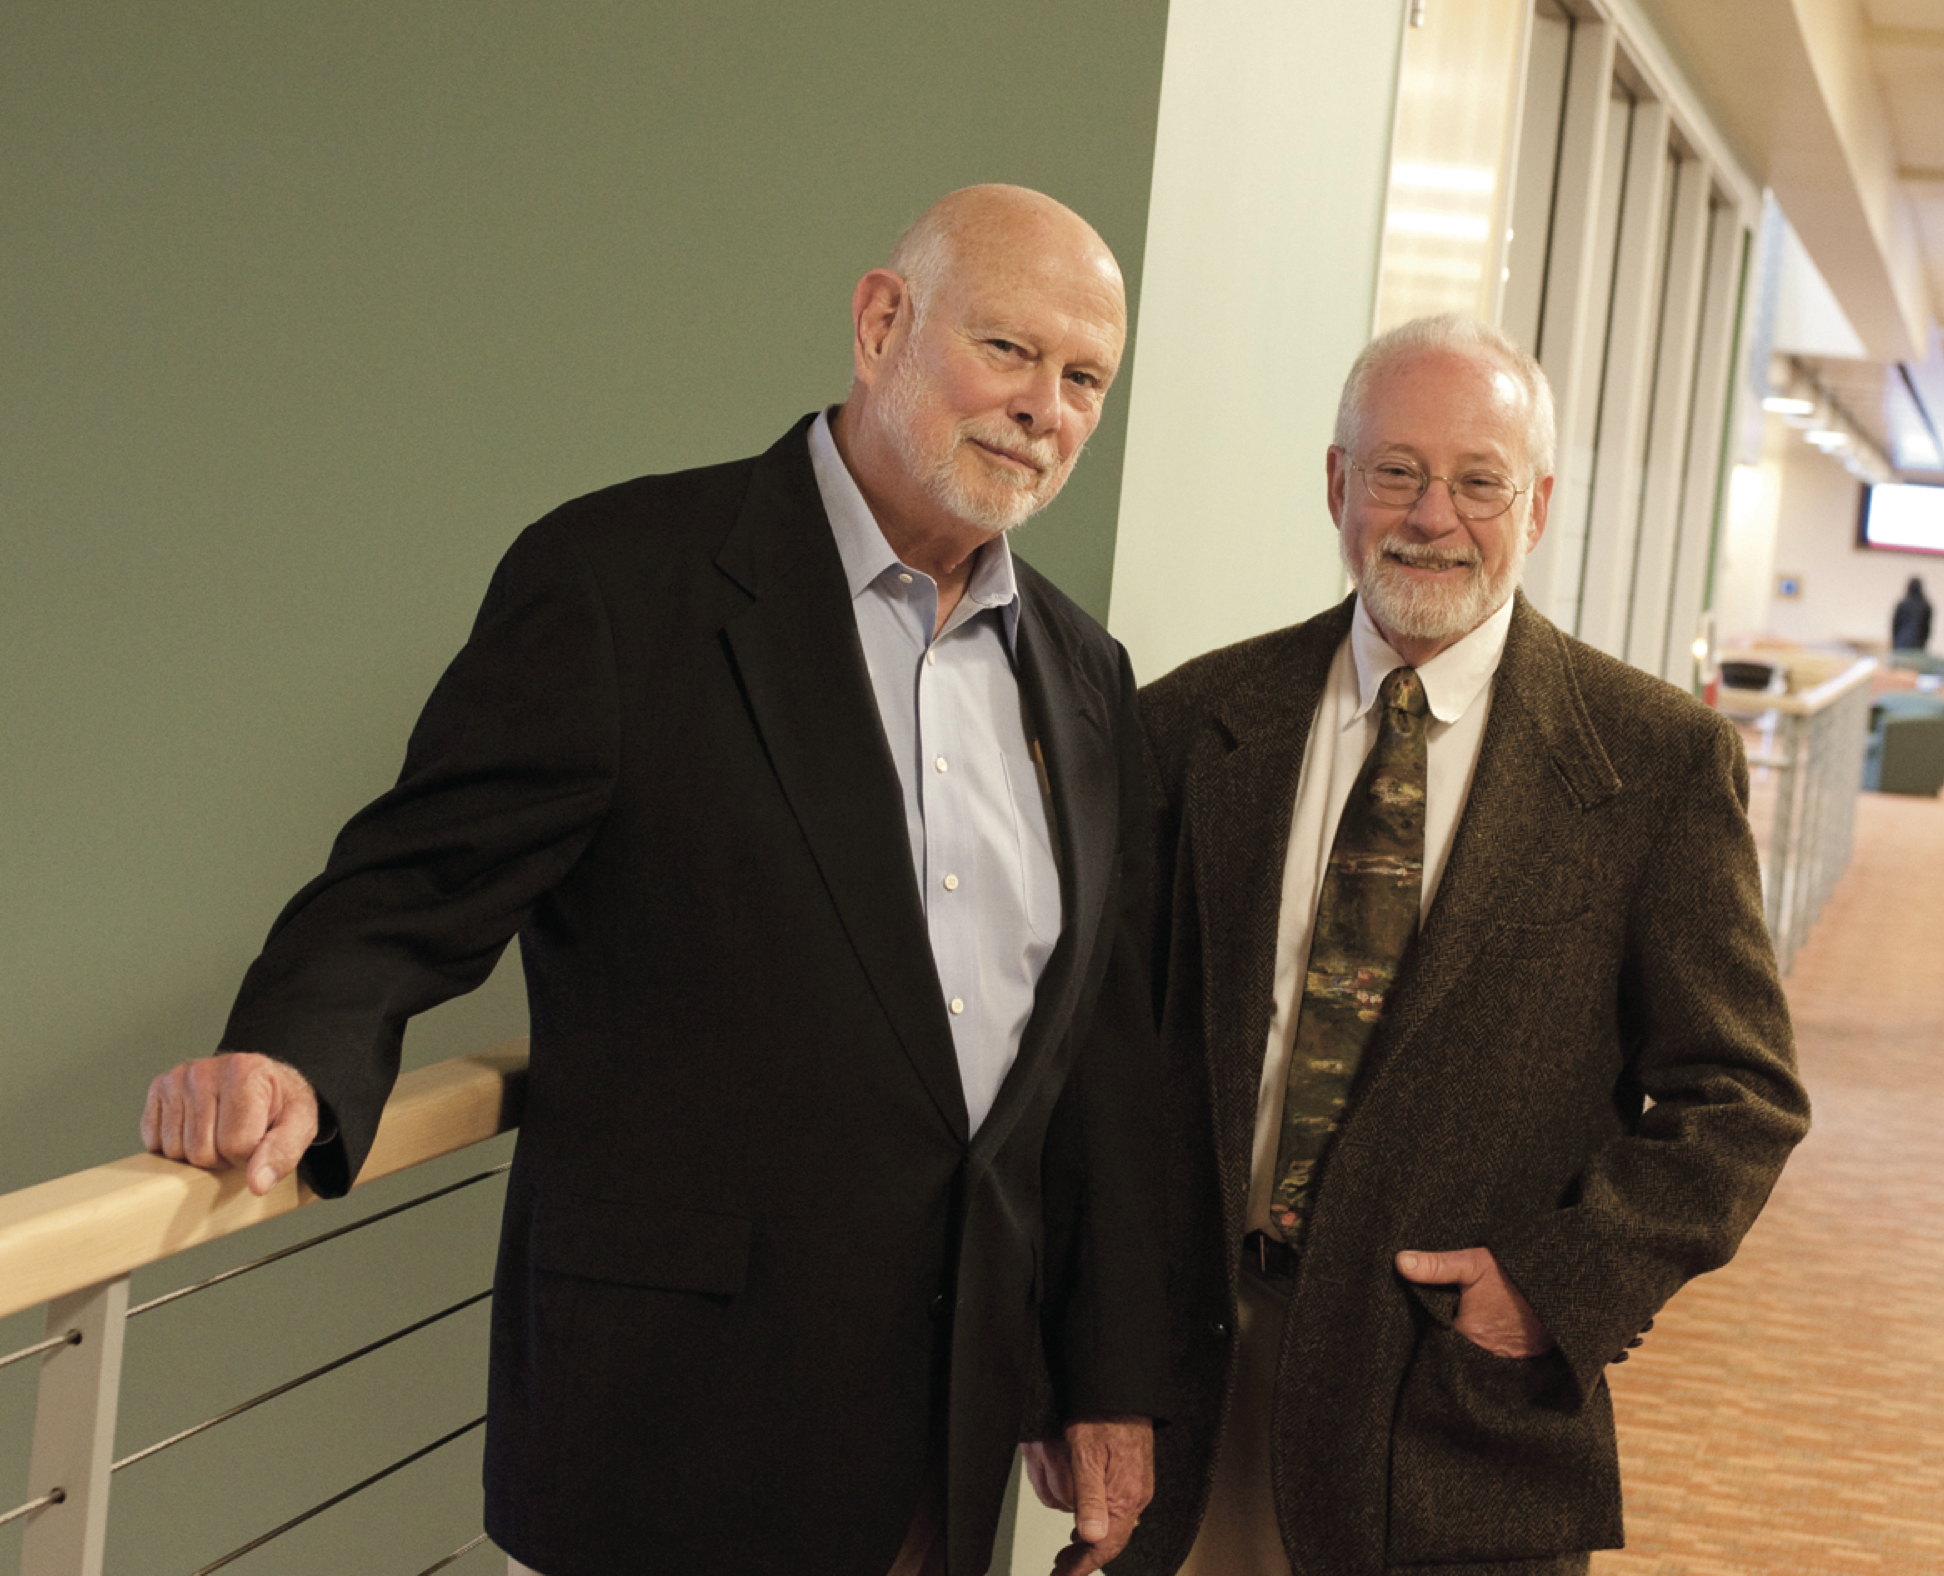 Management and sociology: From left, André Delbecq and Chuck Powers. Photo: Charles Barry